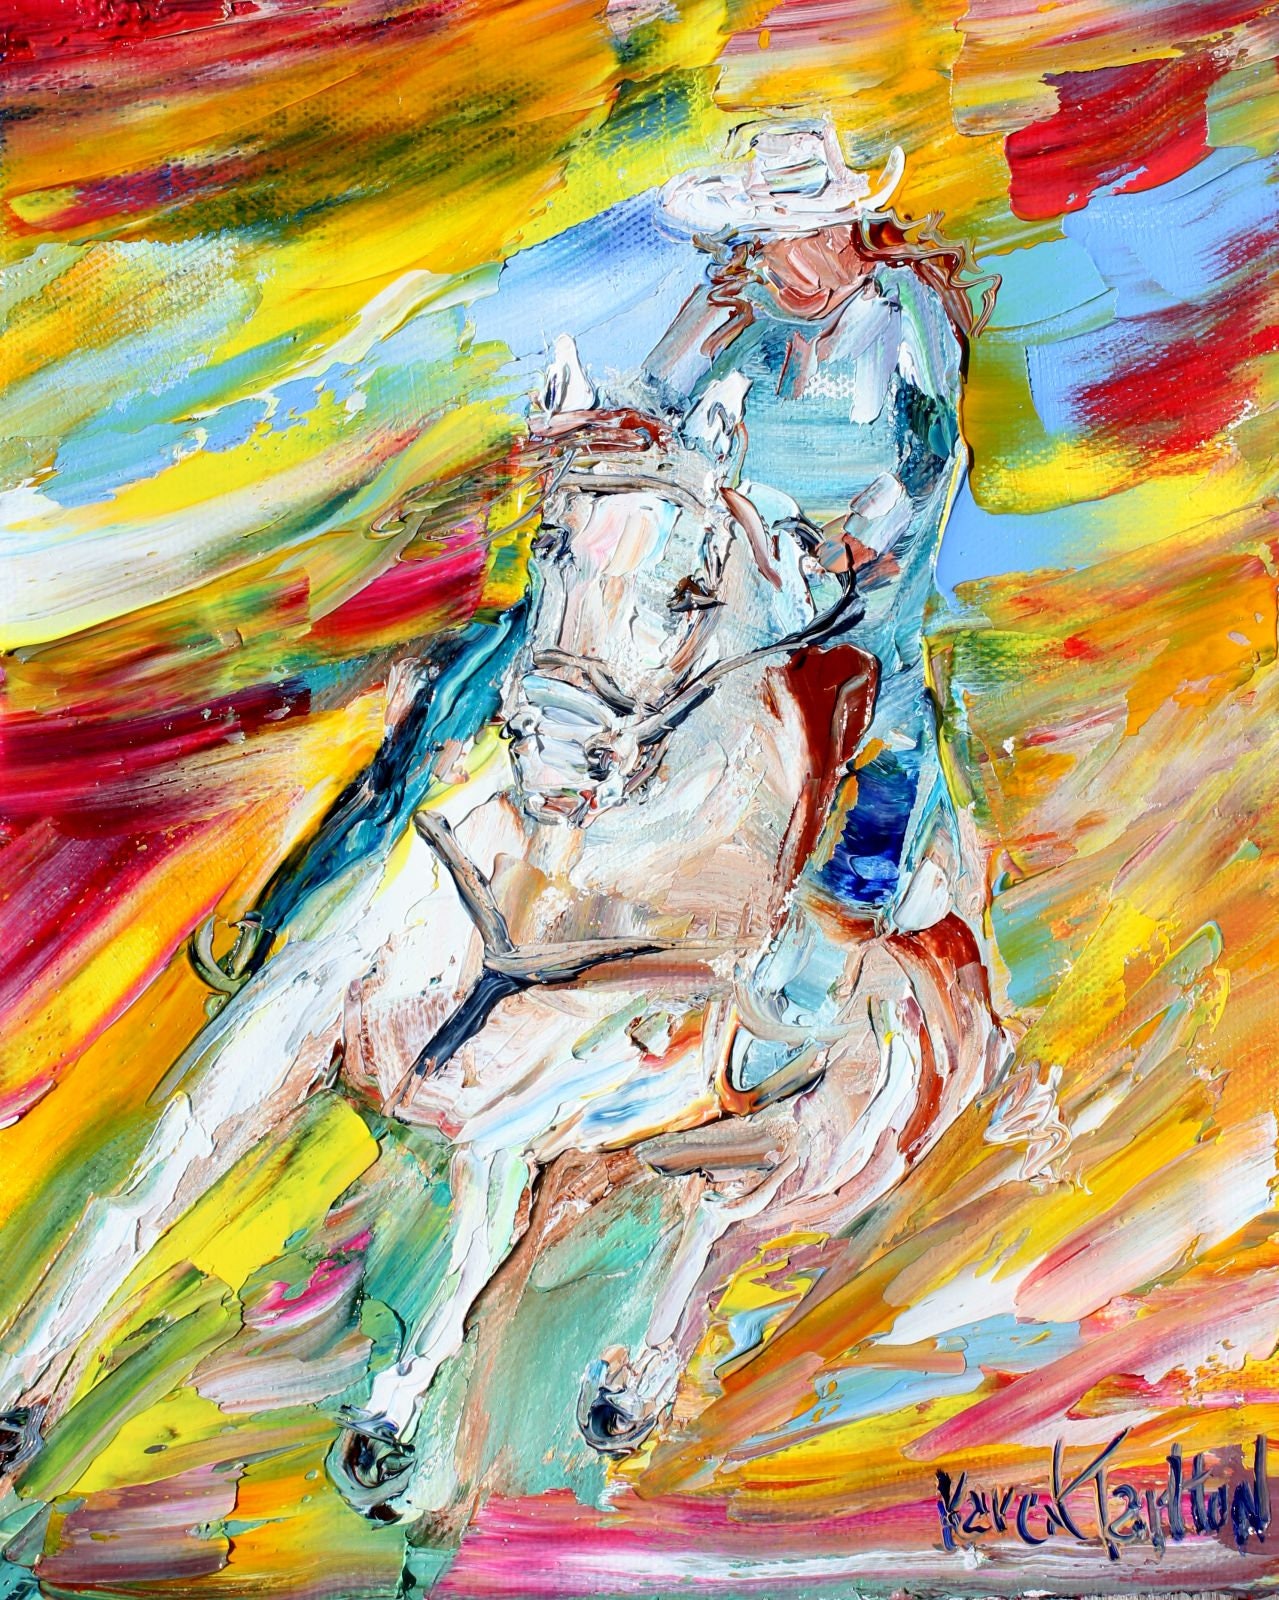 Fine Art Print on watercolor paper, cow fauvism, made from image of past  painting by Karen Tarlton - modern impressionism palette knife